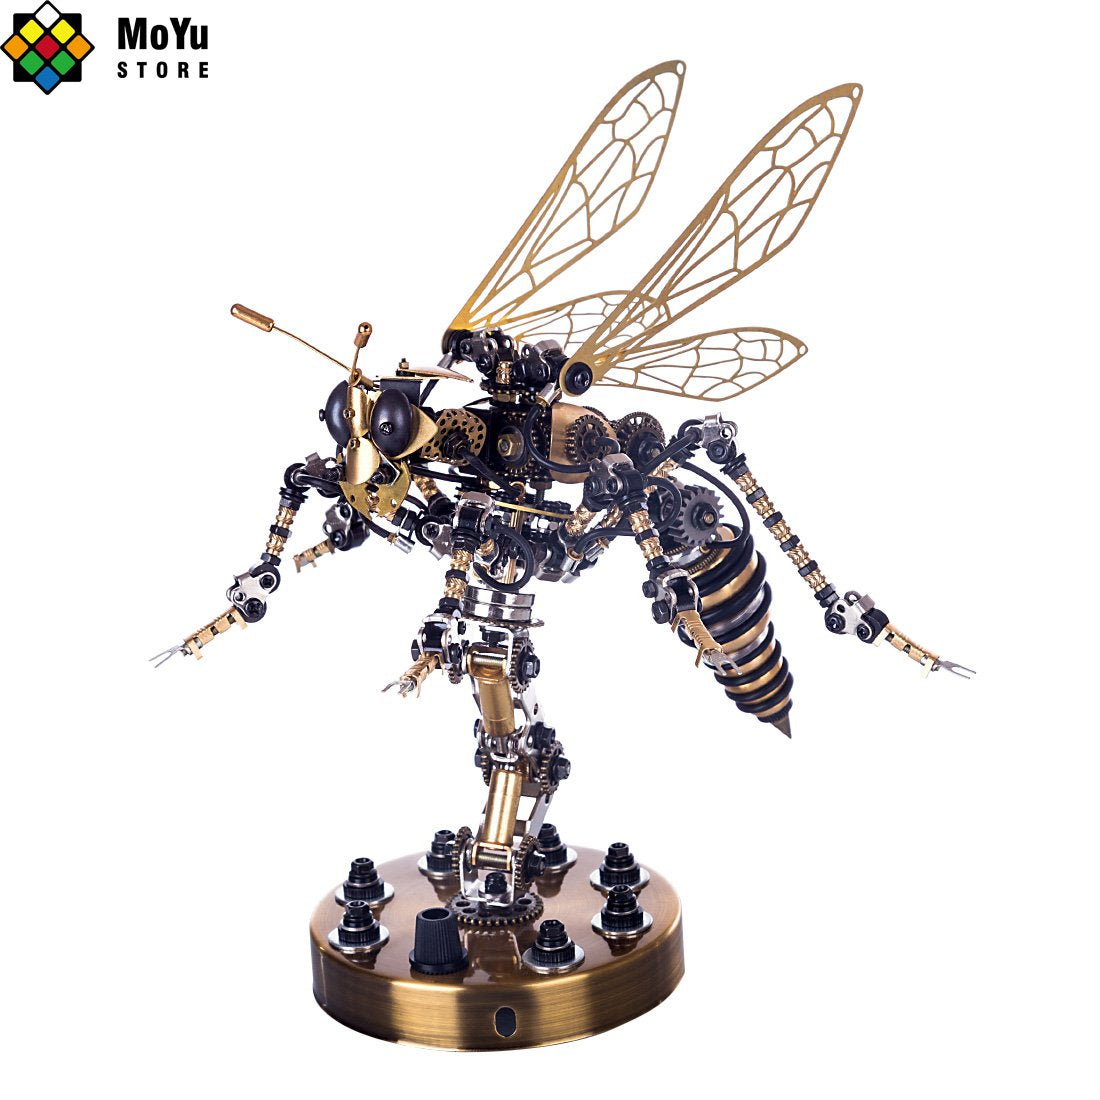 https://www.moyustore.com/cdn/shop/products/moyustore-3d-metal-diy-mechanical-wasp-insects-puzzle-model-kit-assembly-jigsaw-crafts_12.jpg?v=1615516745